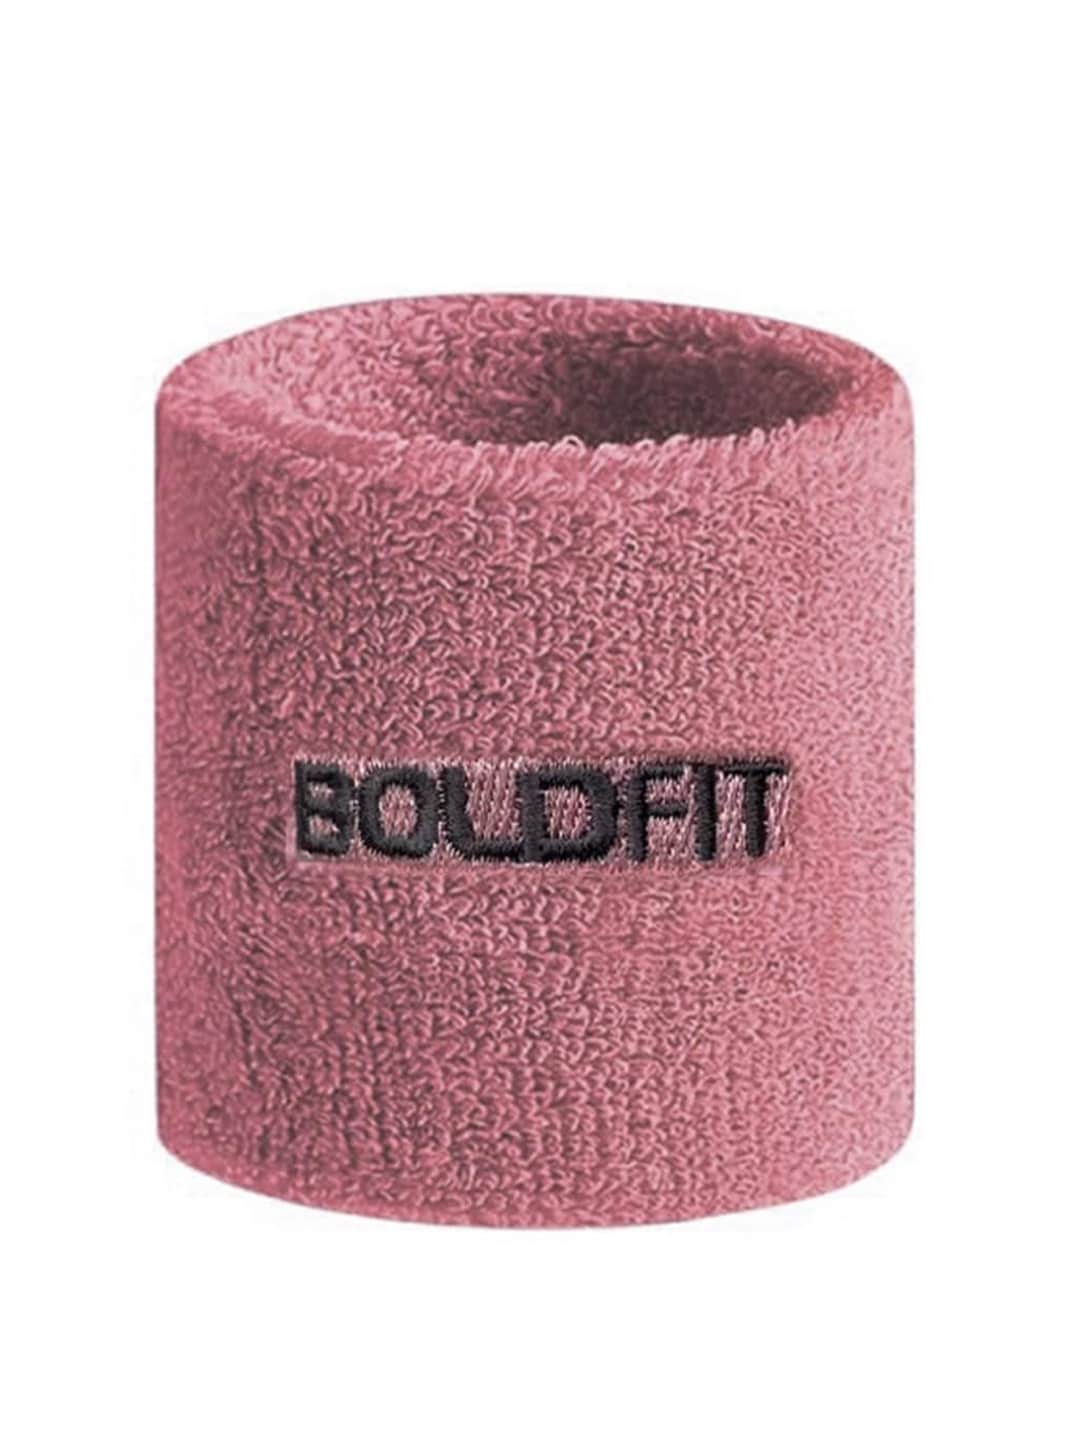 BOLDFIT Pink & Black Printed Wristbands Price in India